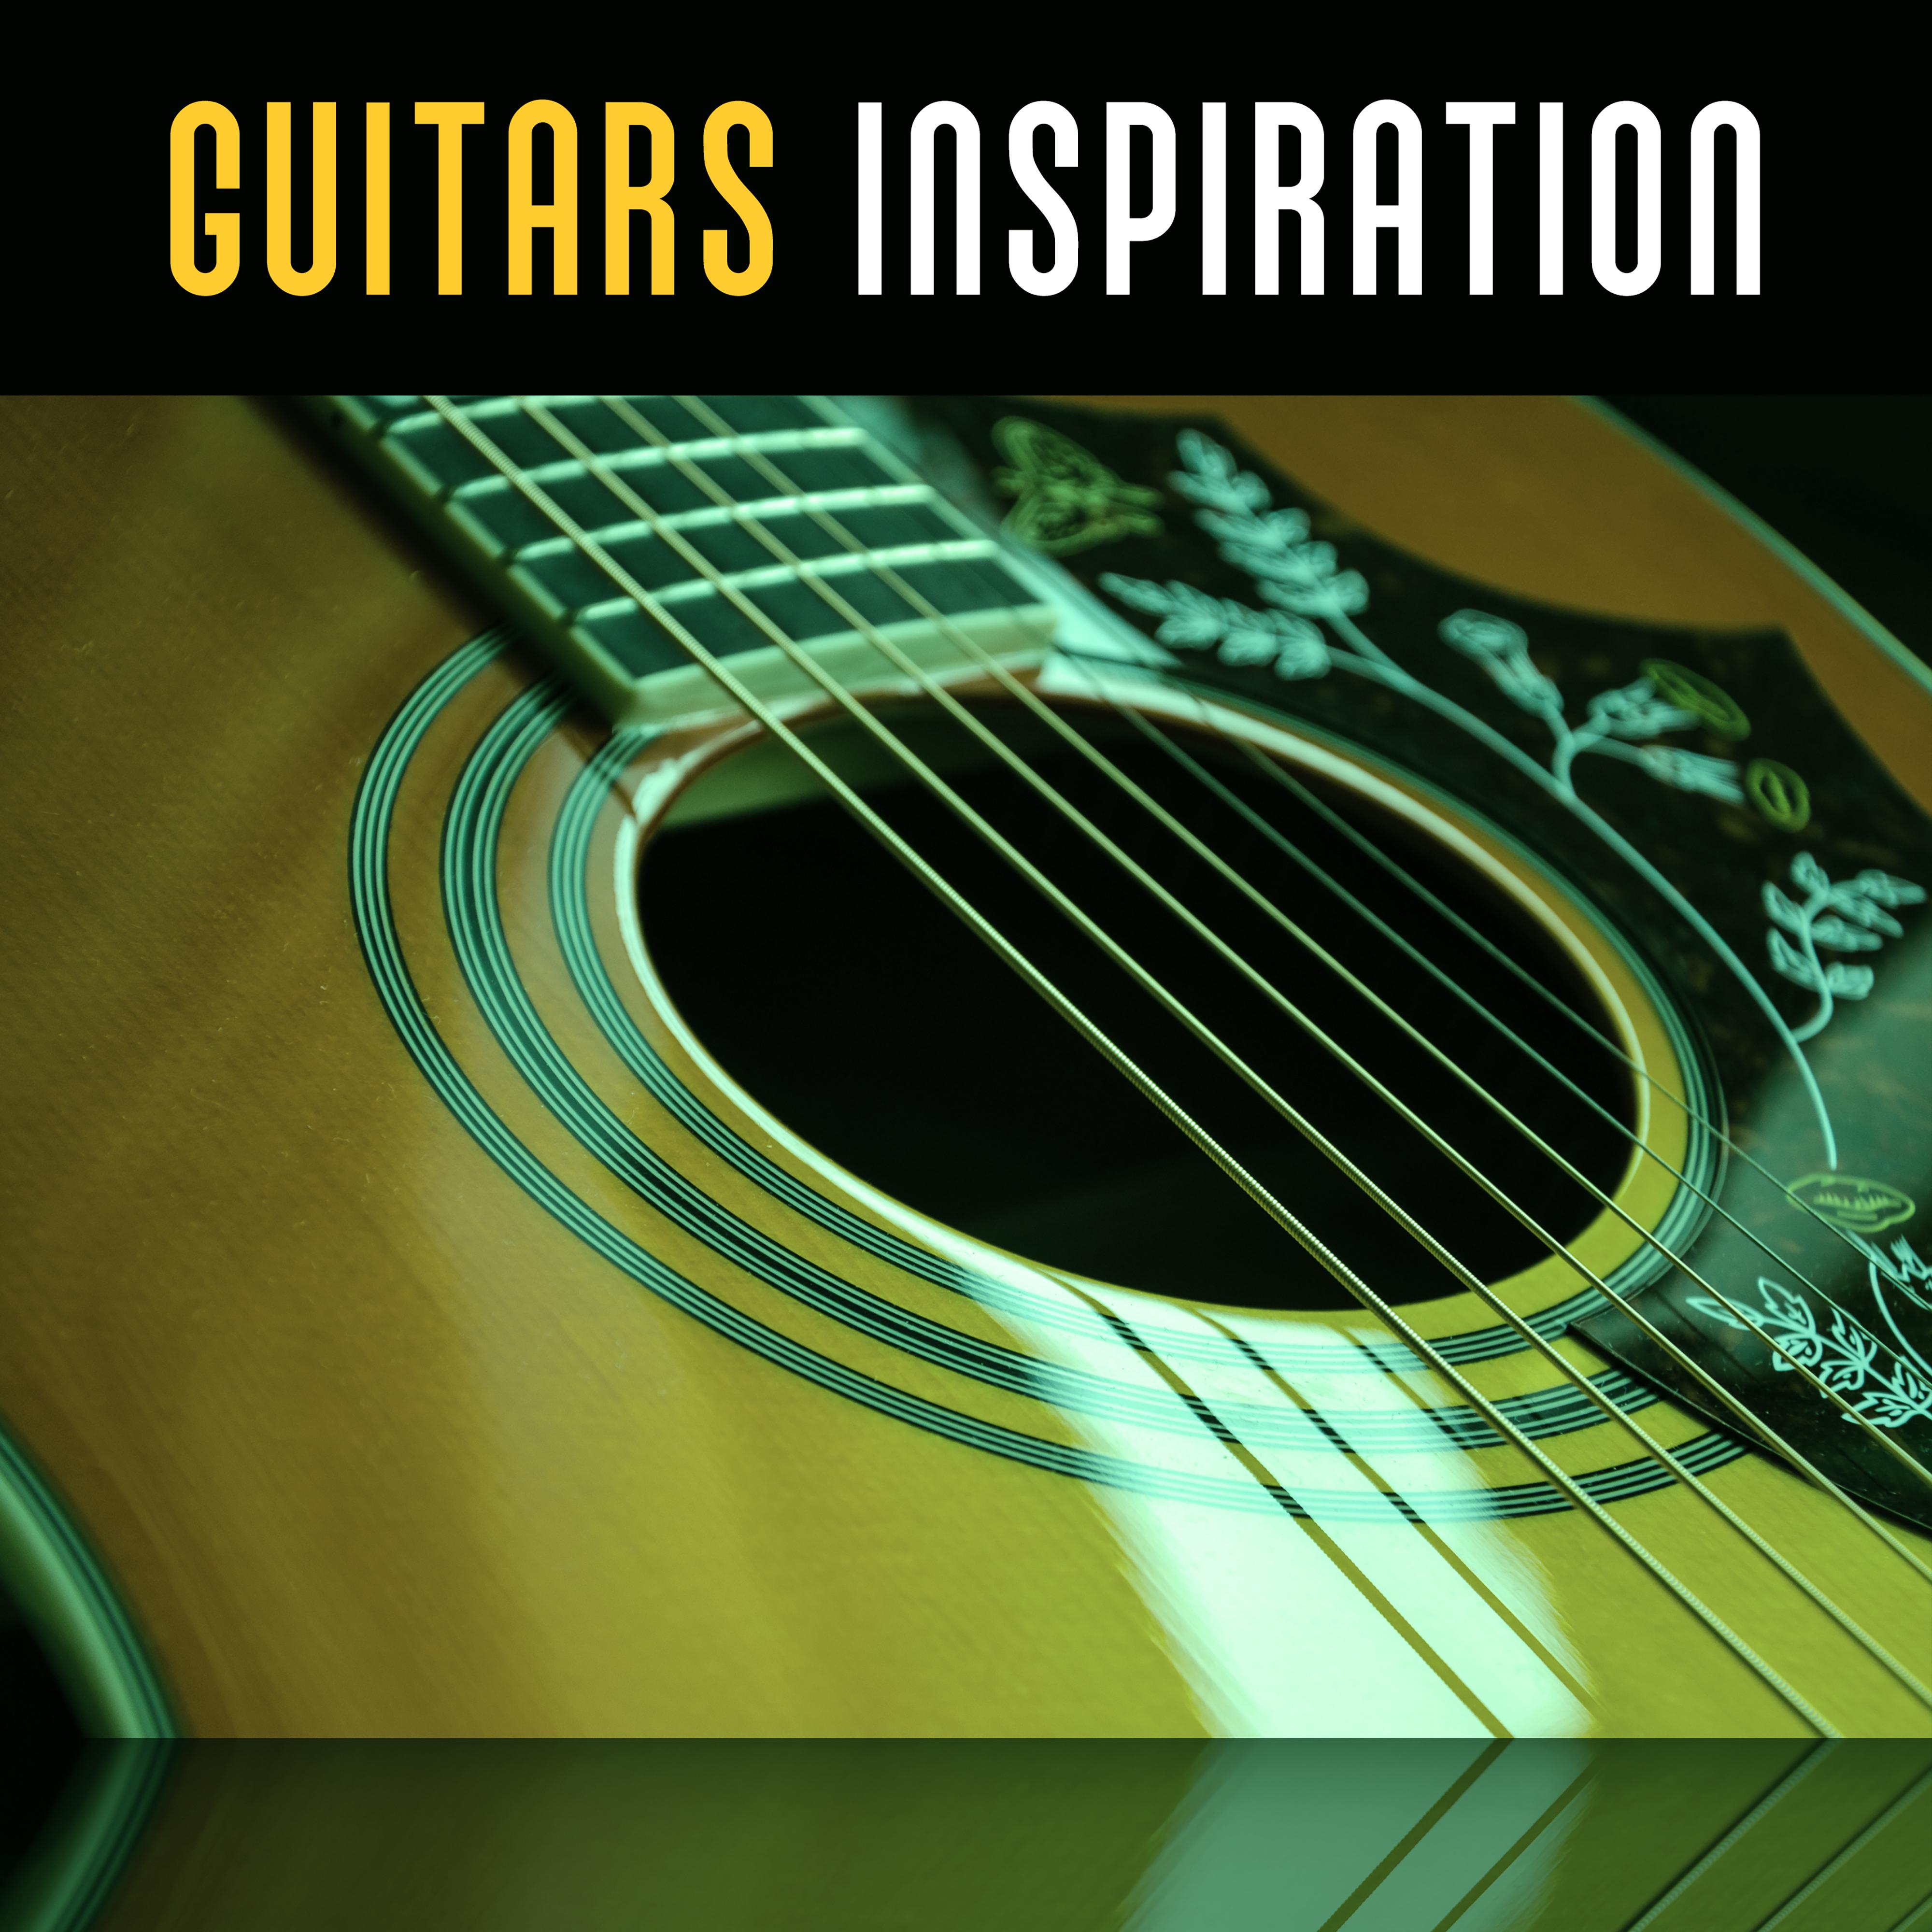 Guitars Inspiration  New Instrumental Music of Guitar Sounds, Ambient Piano  Guitar Music, Chilled Jazz